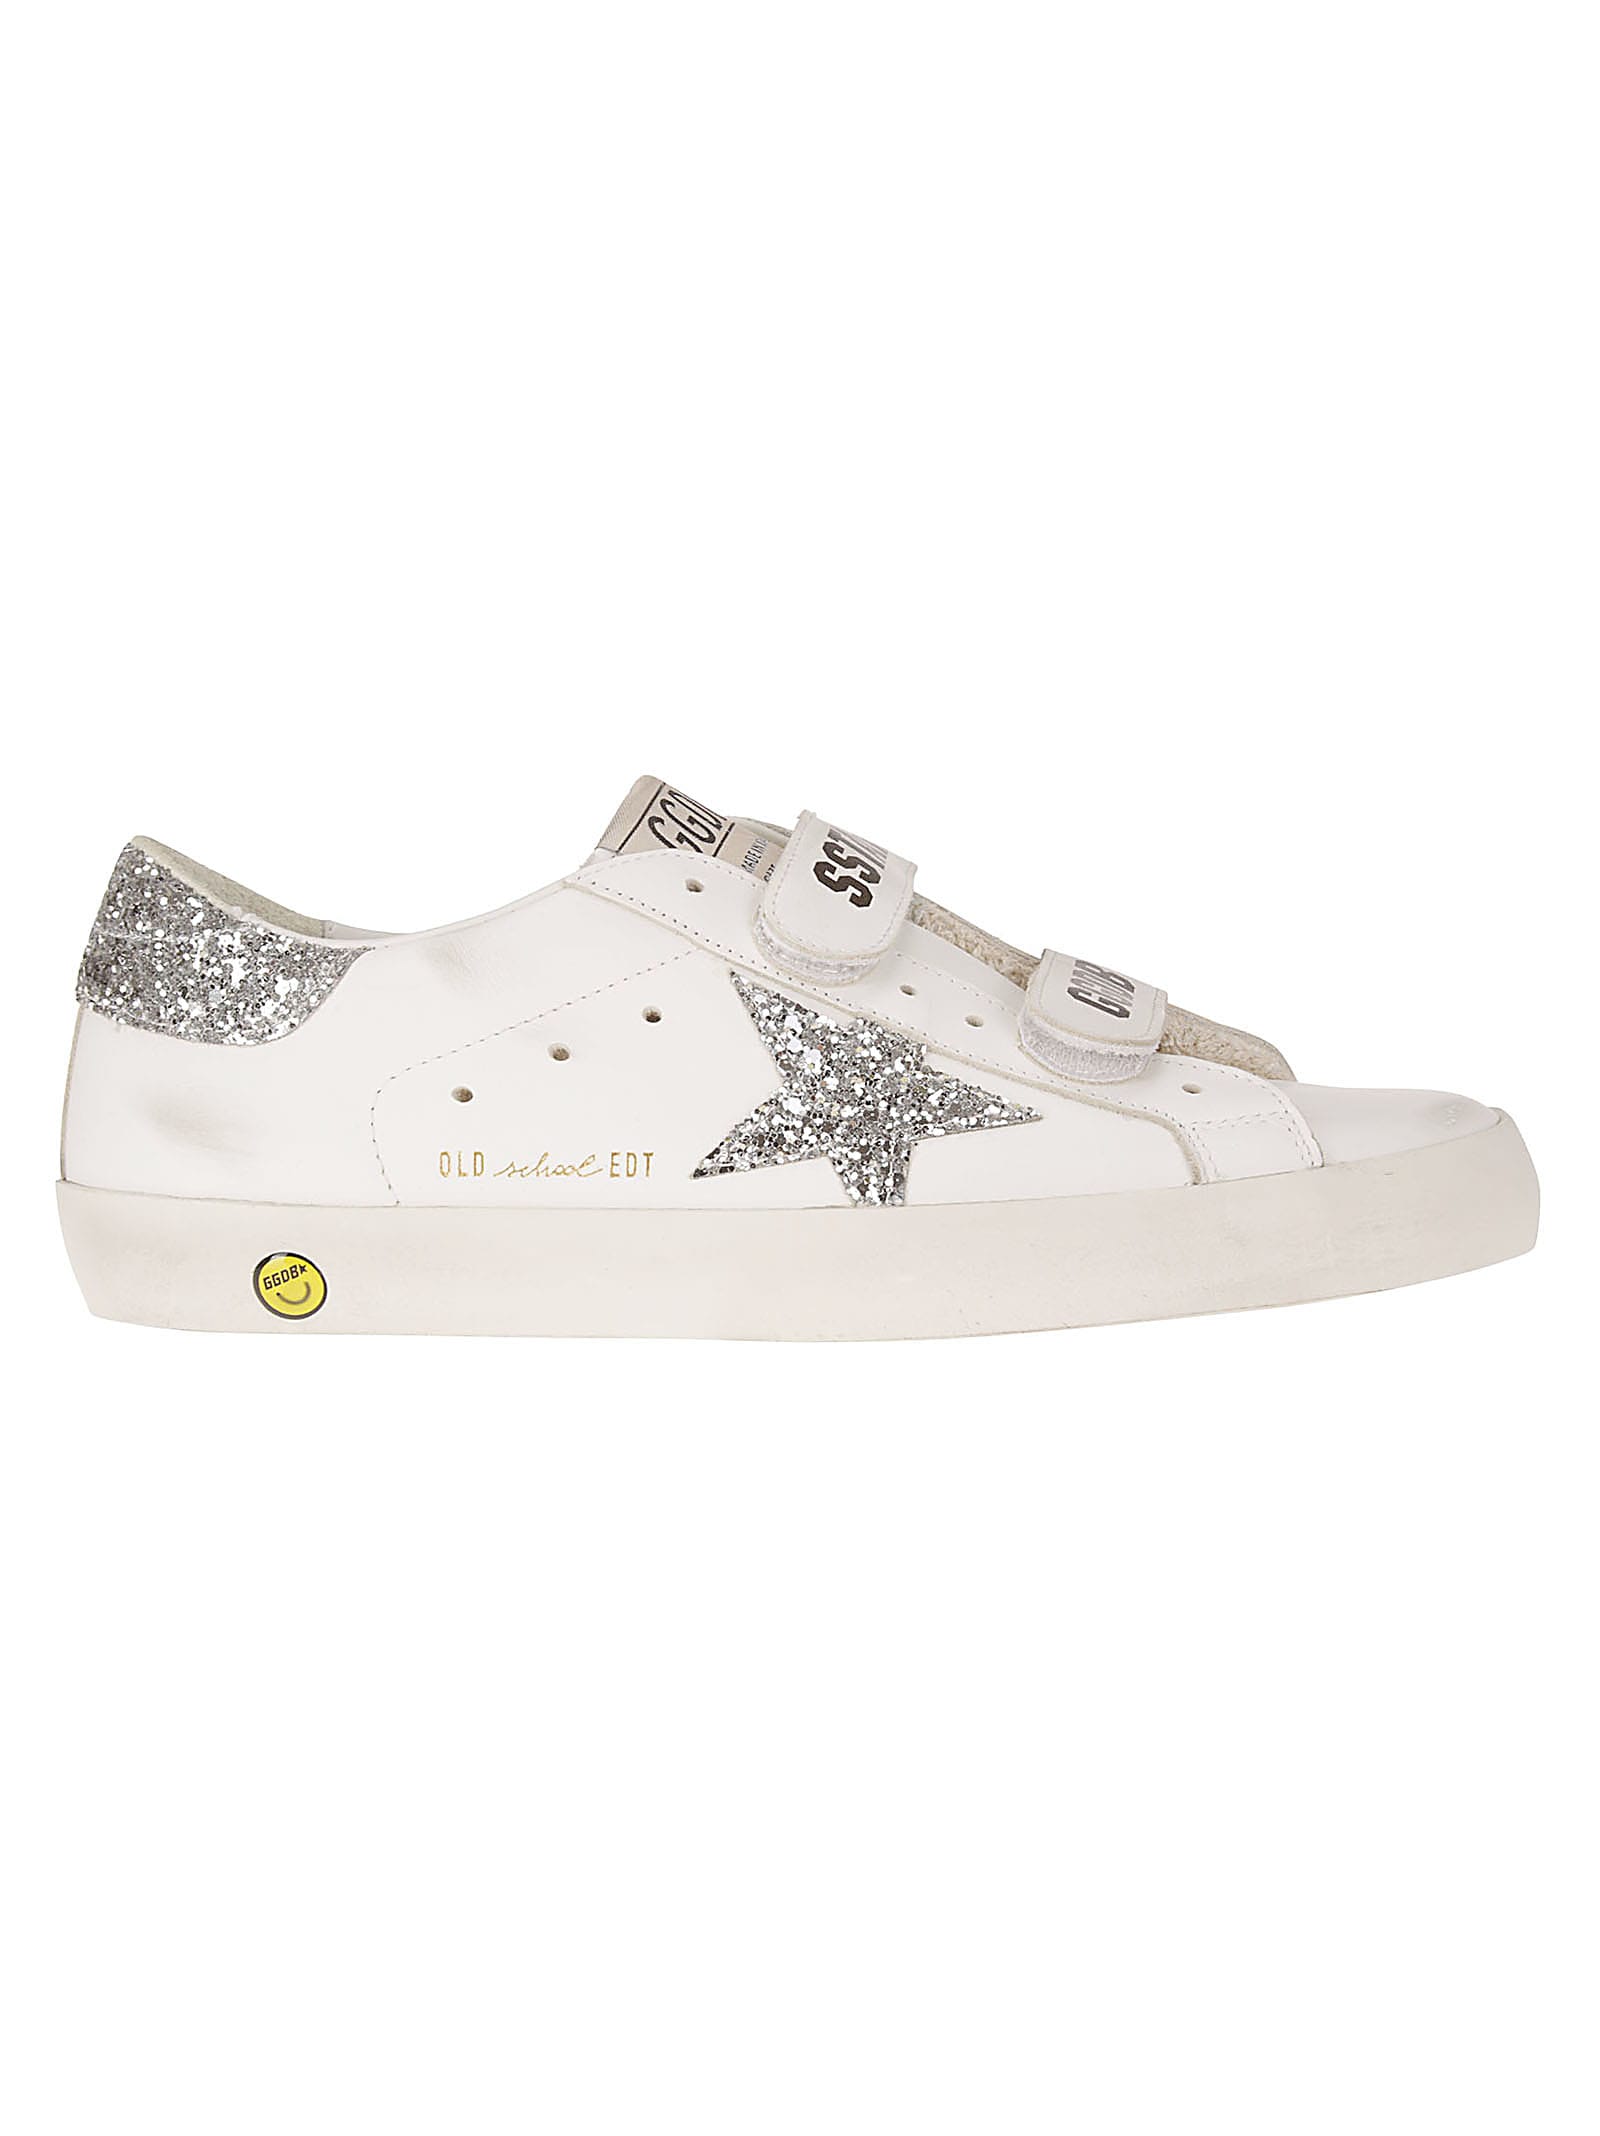 Golden Goose Kids' Old School Leather Upper Suede Toe Glitter Star In White/ice/silver